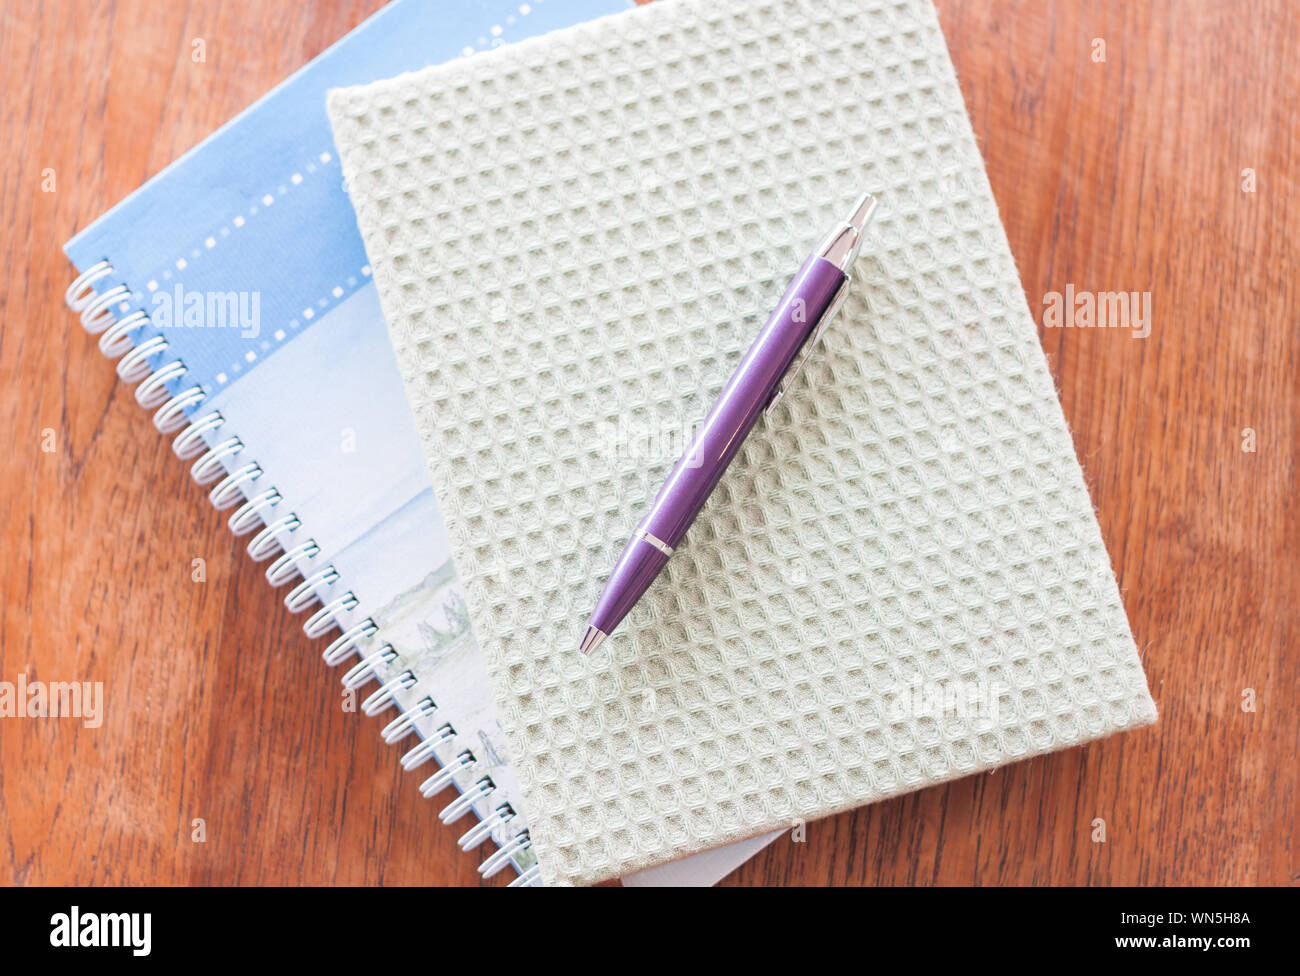 High Angle View Of Pen With Diaries On Wooden Table Stock Photo